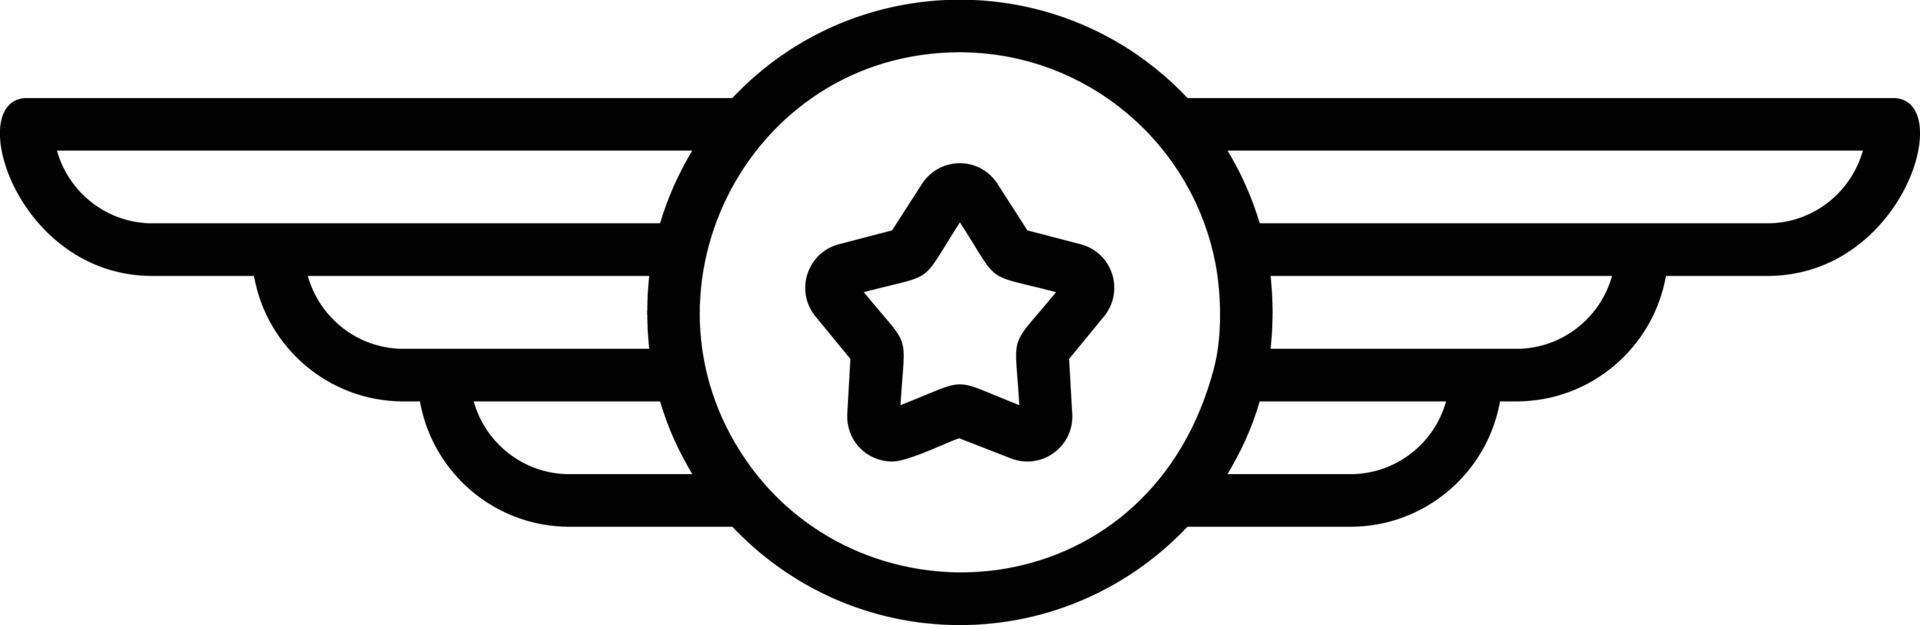 Medal Line Icon vector